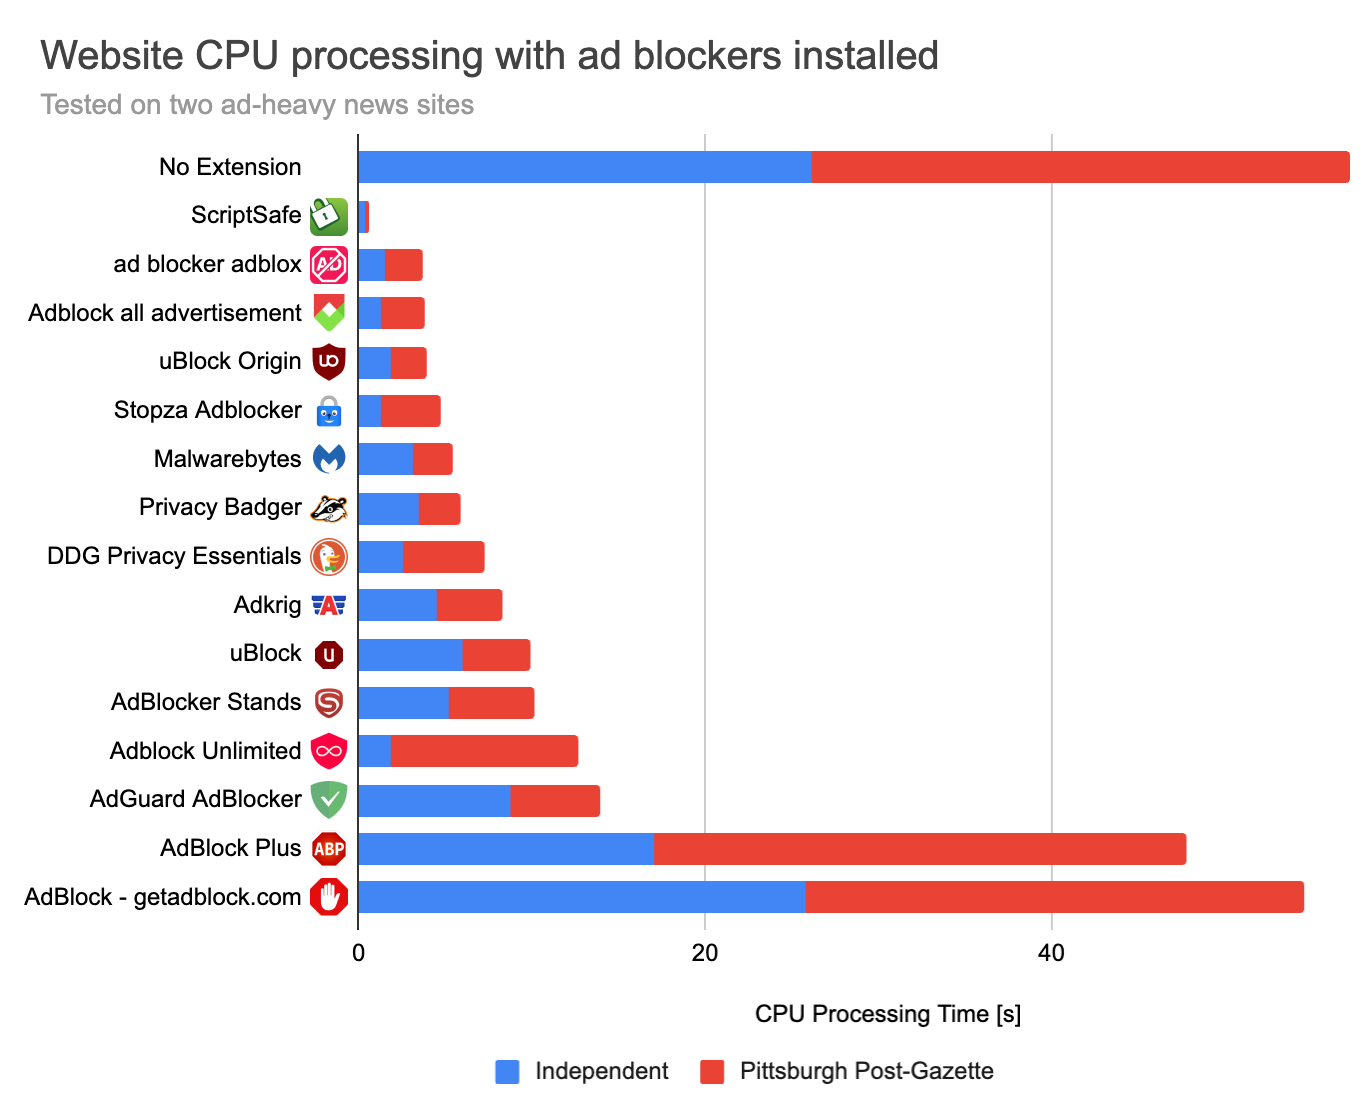 Chart showing reduction in CPU processing time with ad blockers installed